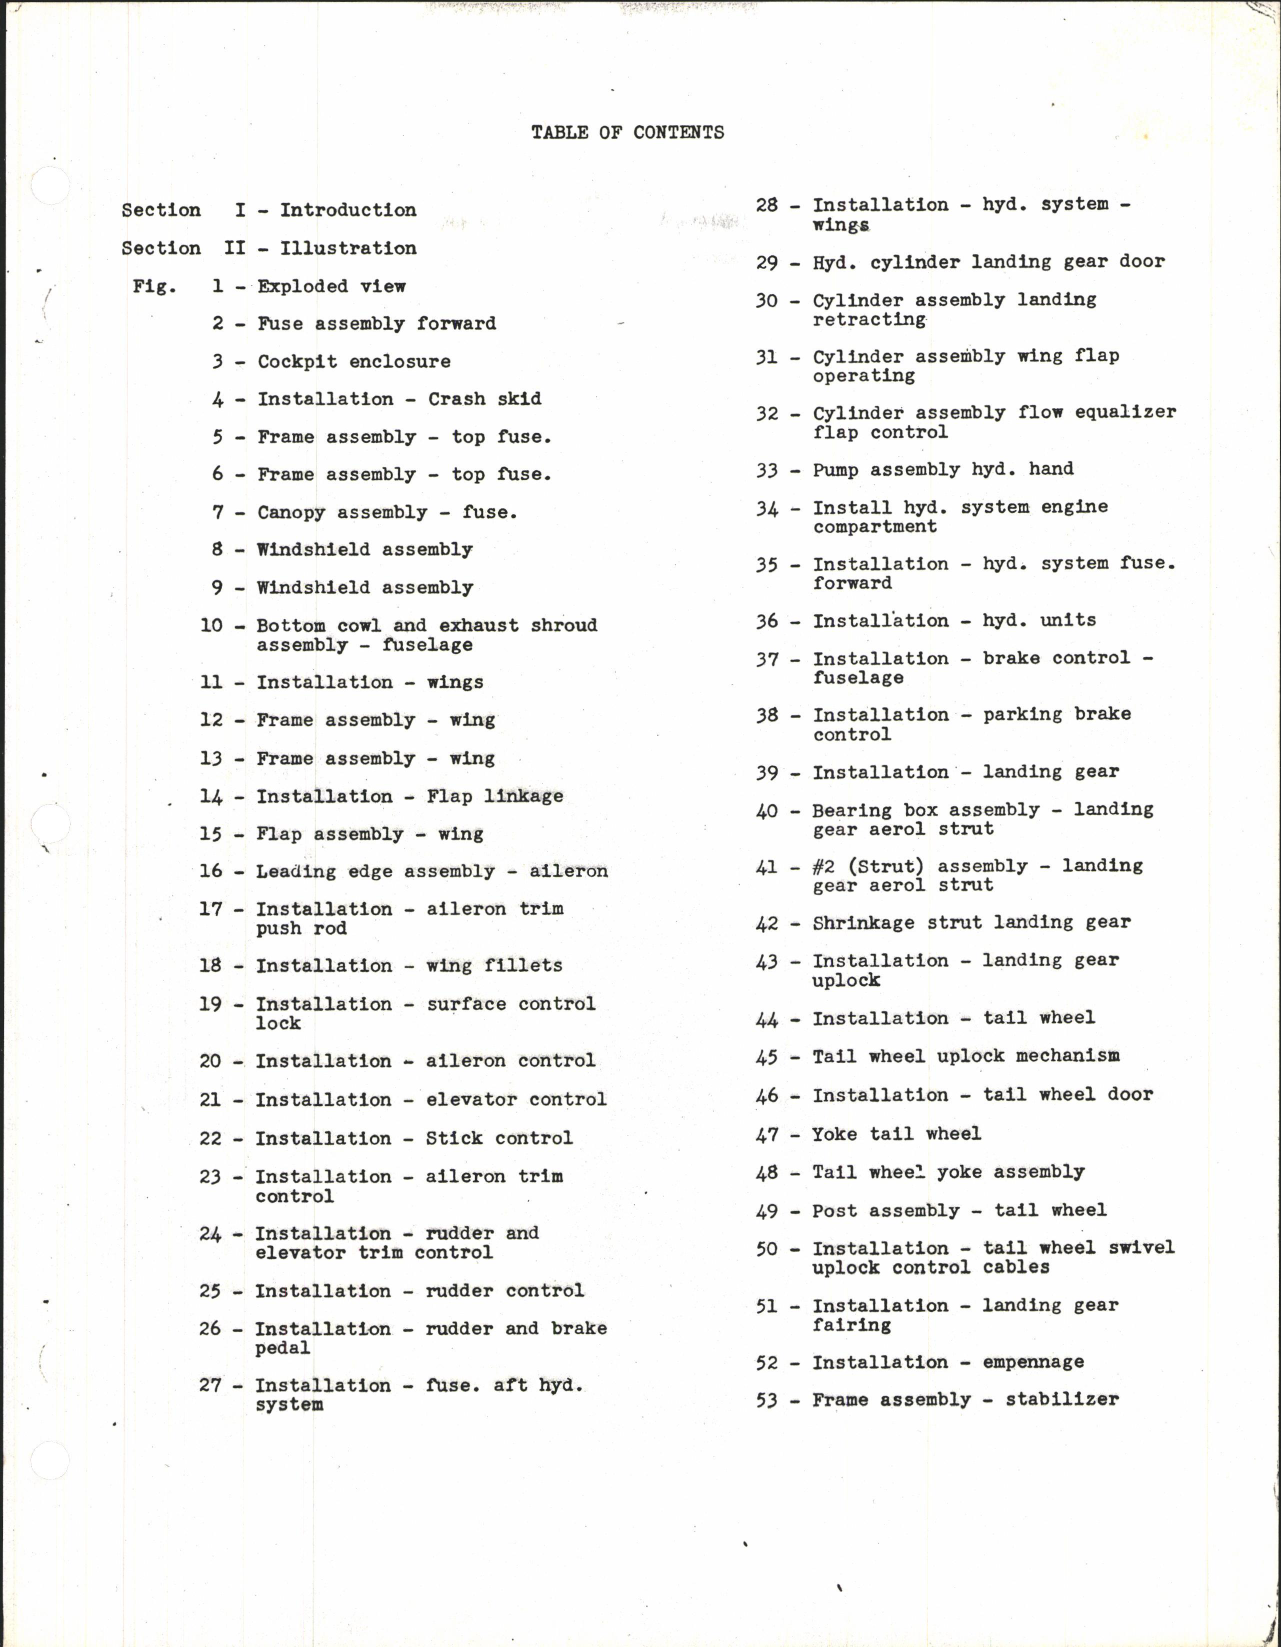 Sample page 5 from AirCorps Library document: Parts Catalog for Model P-47 Airplanes